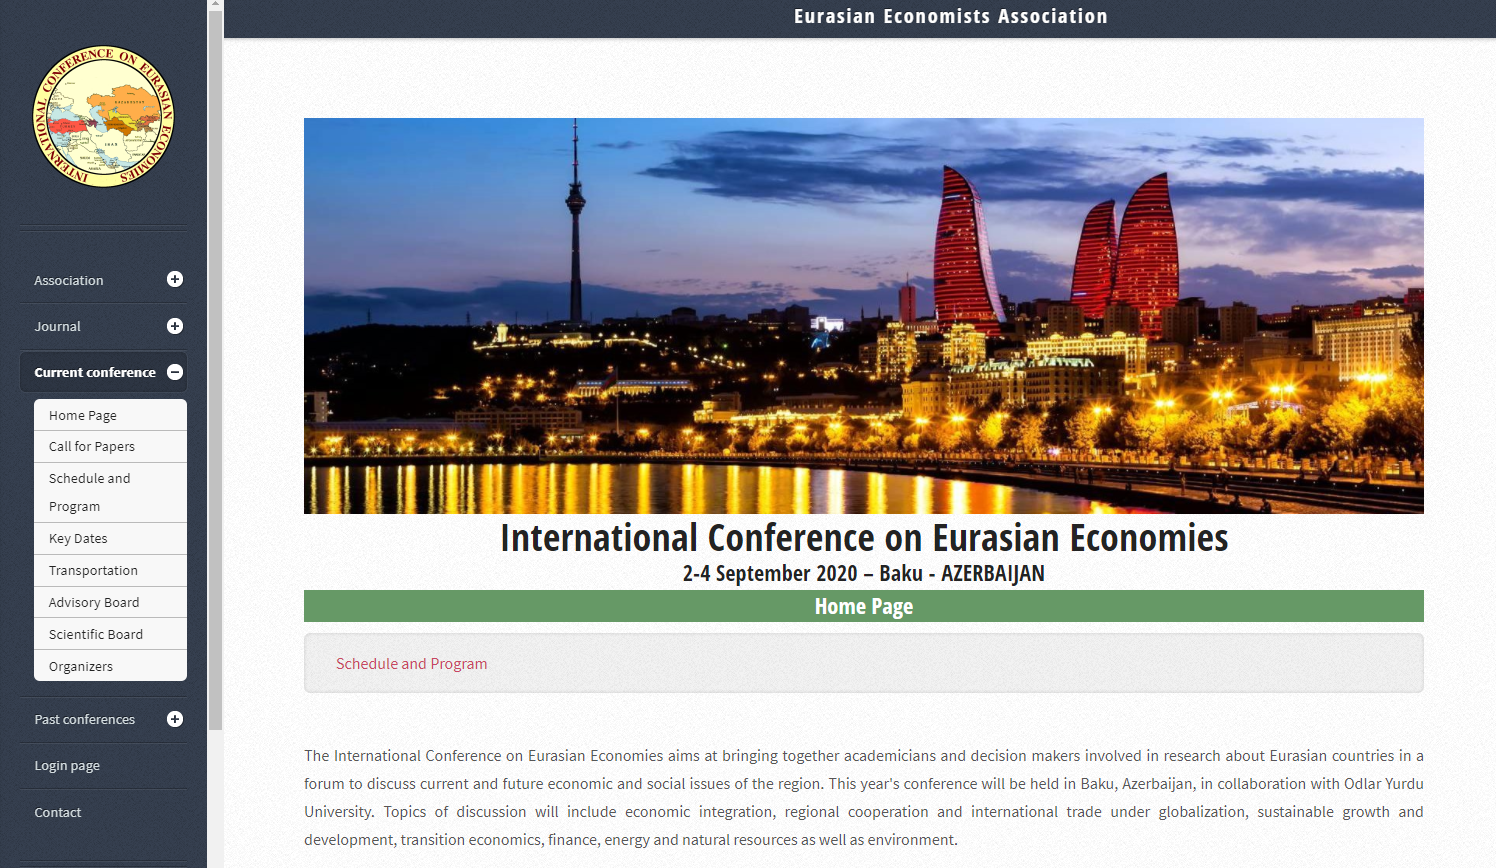 BEU employees participate in the International Conference on Eurasian Economies